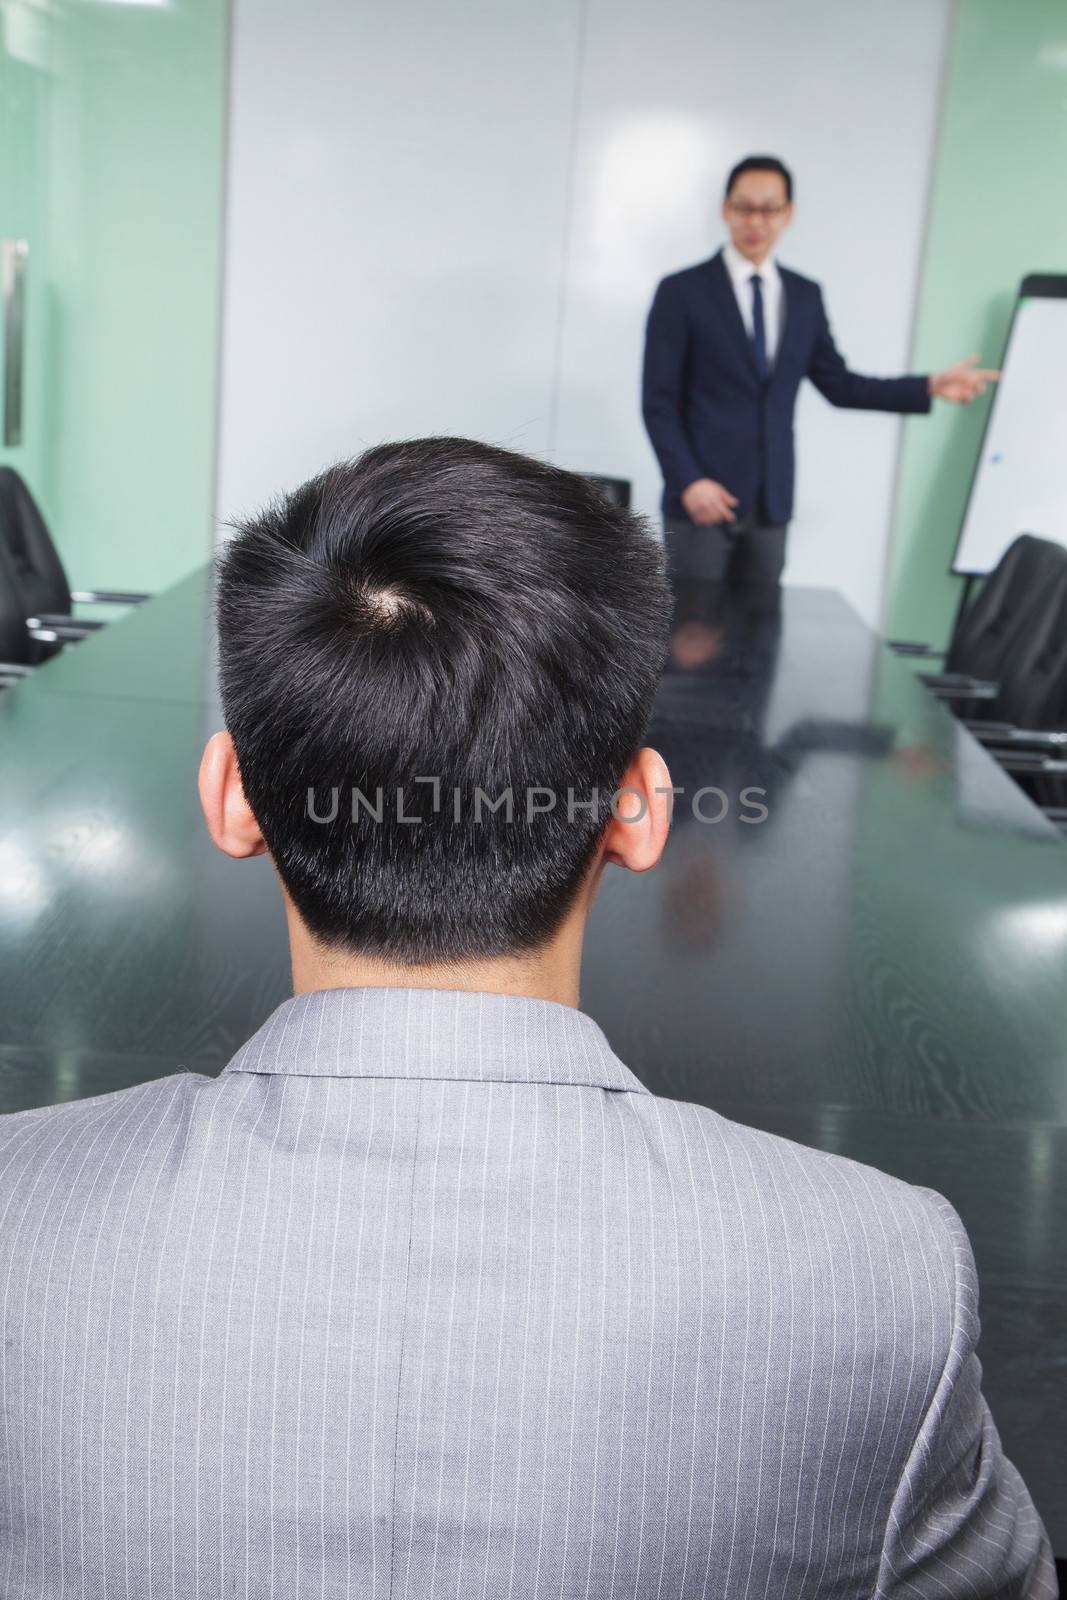 Rear View of Businessman Listening to Presentation by XiXinXing